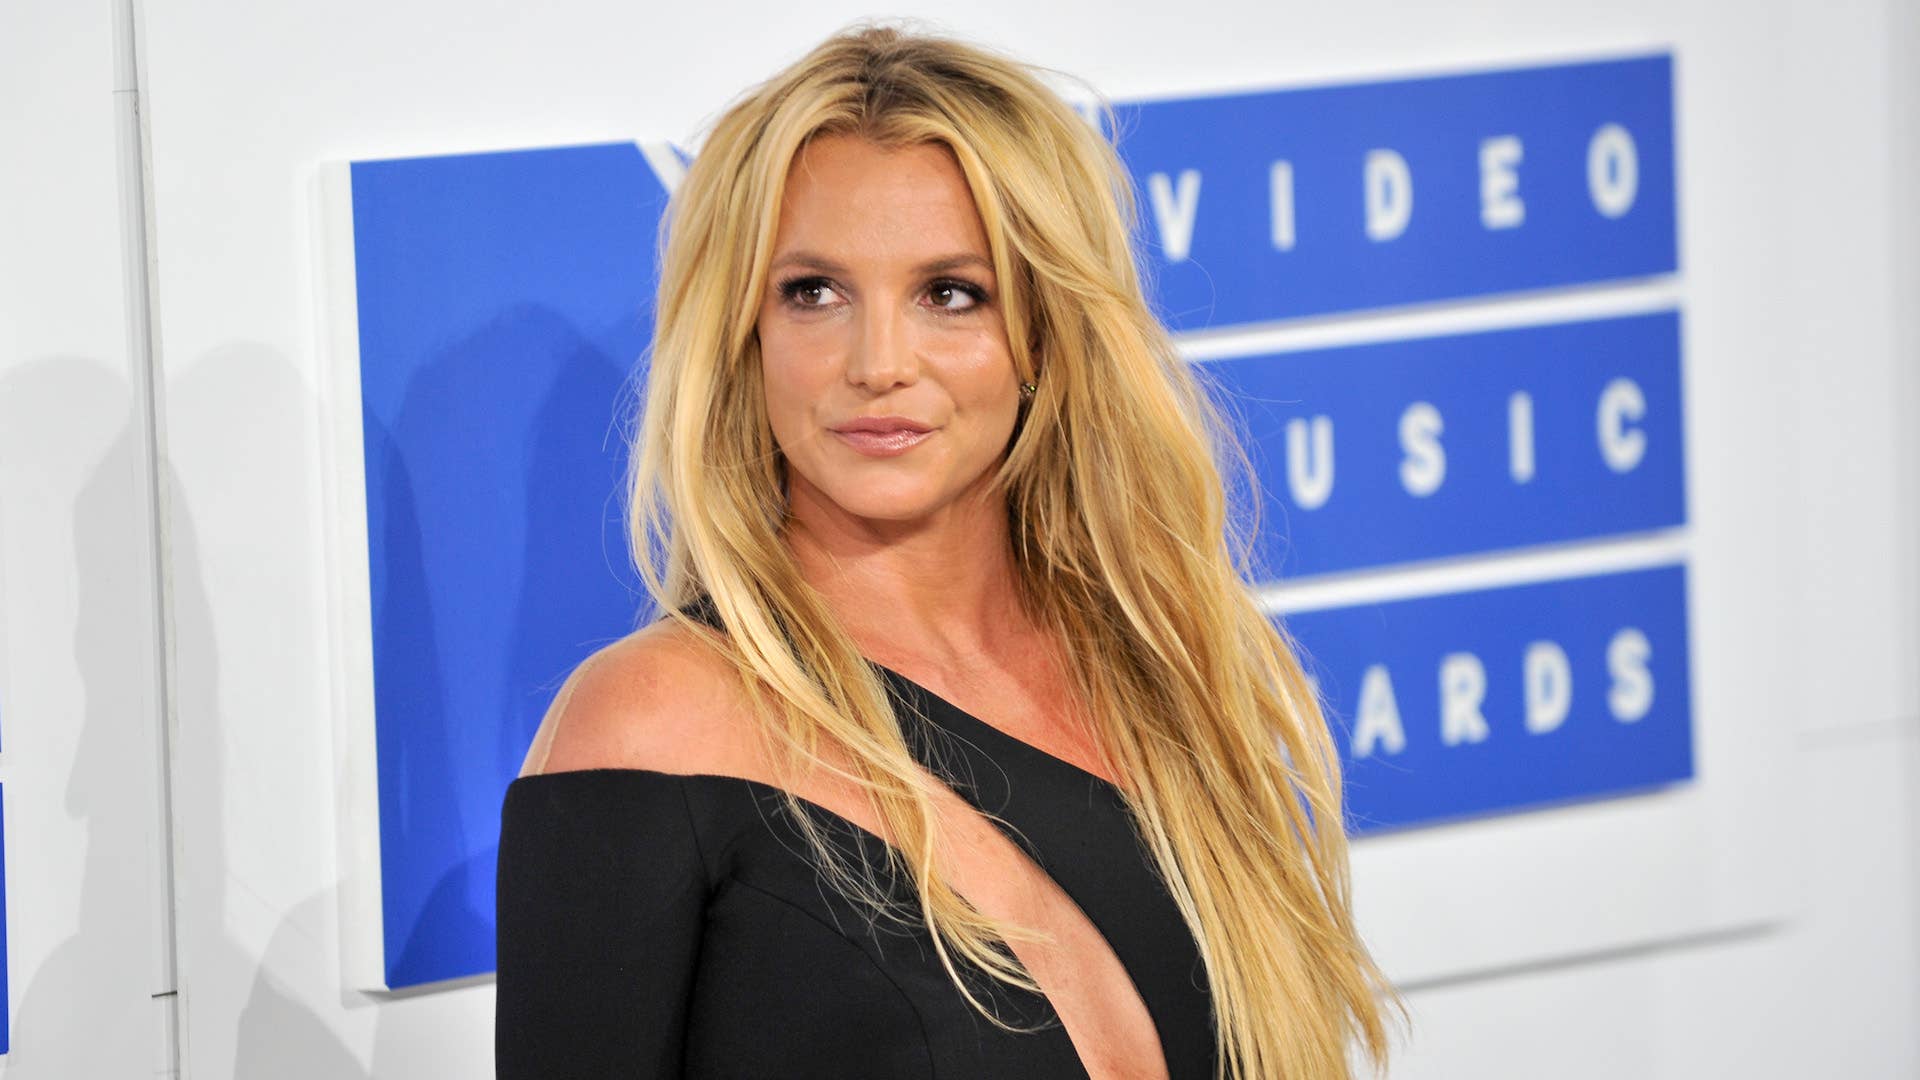 Britney Spears at the MTV VMAs